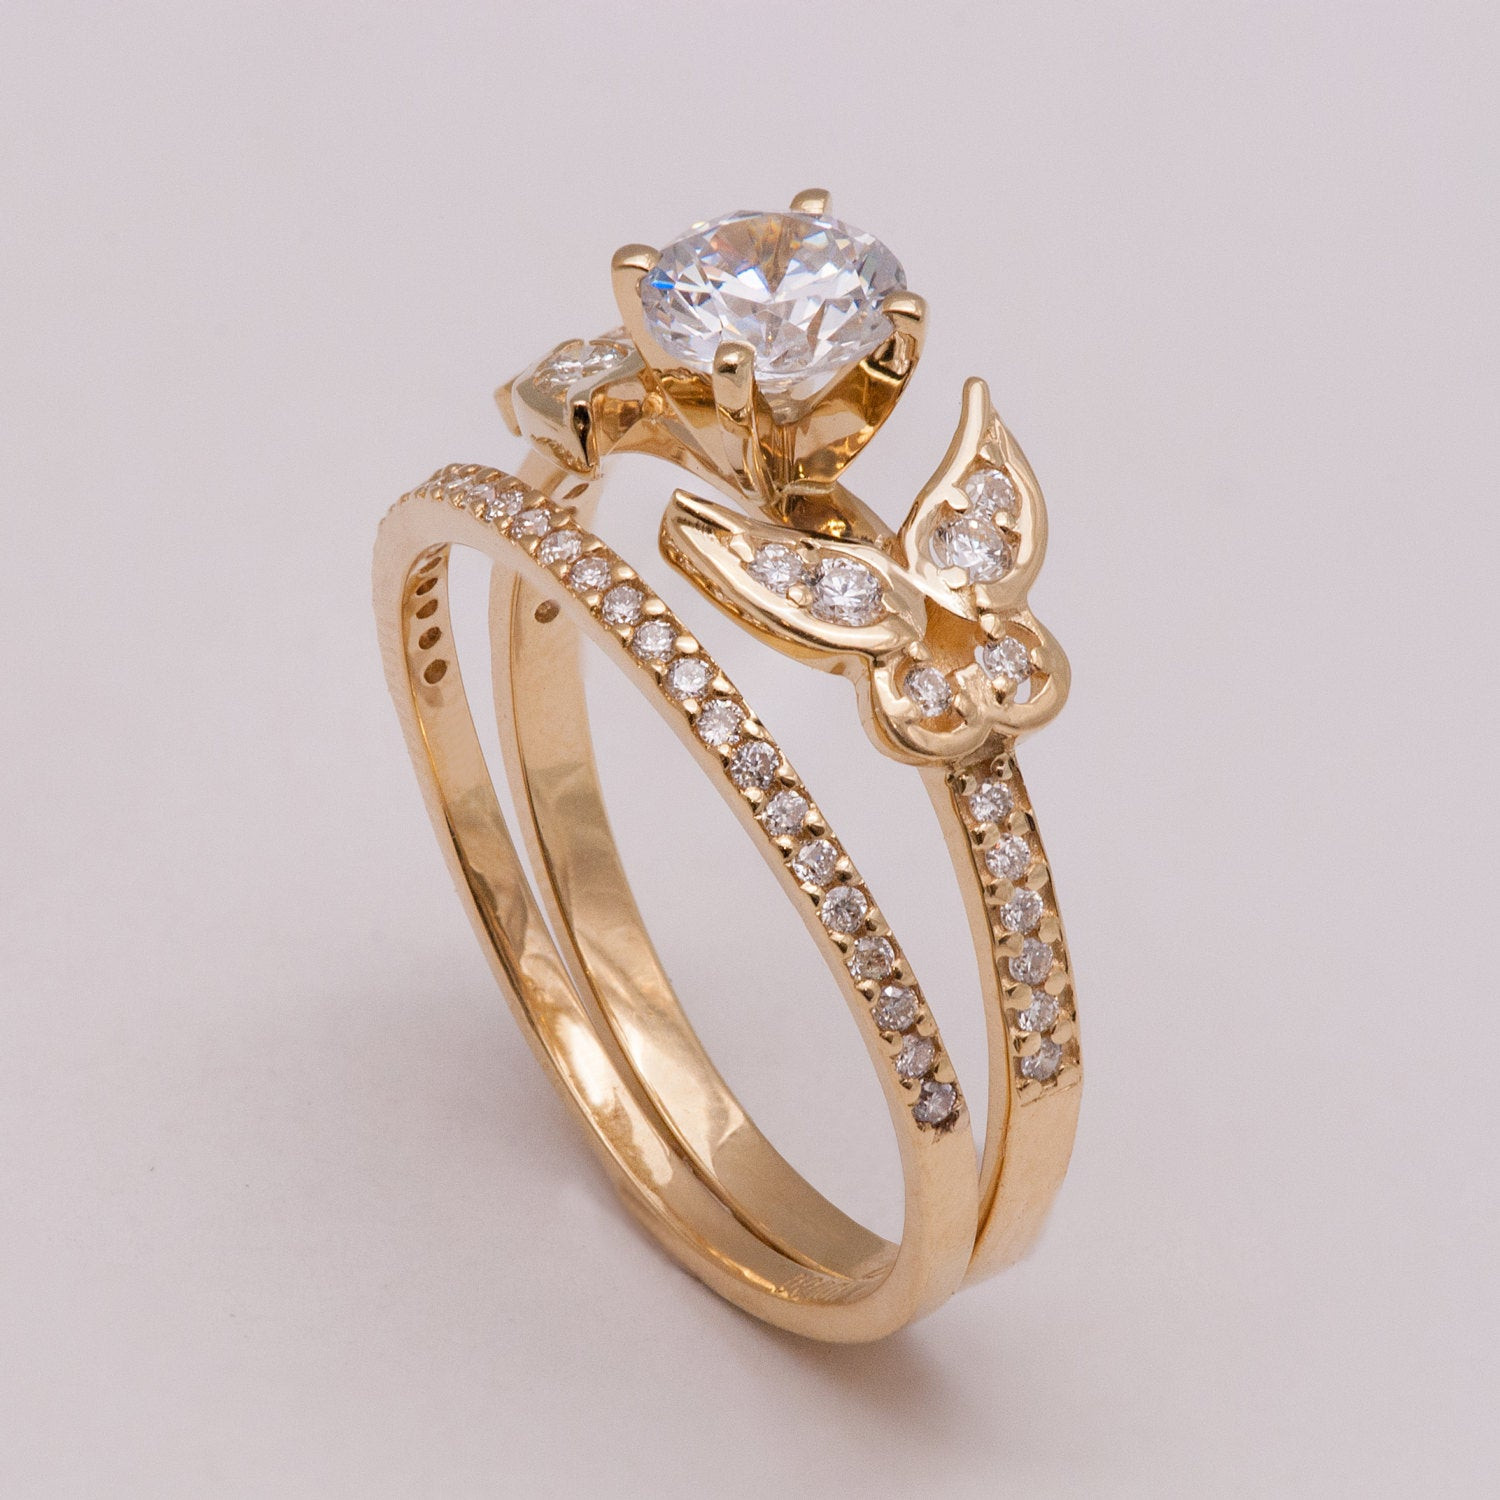 Butterfly Wedding Rings
 Butterfly Bridal Set Gold and Diamond engagement ring